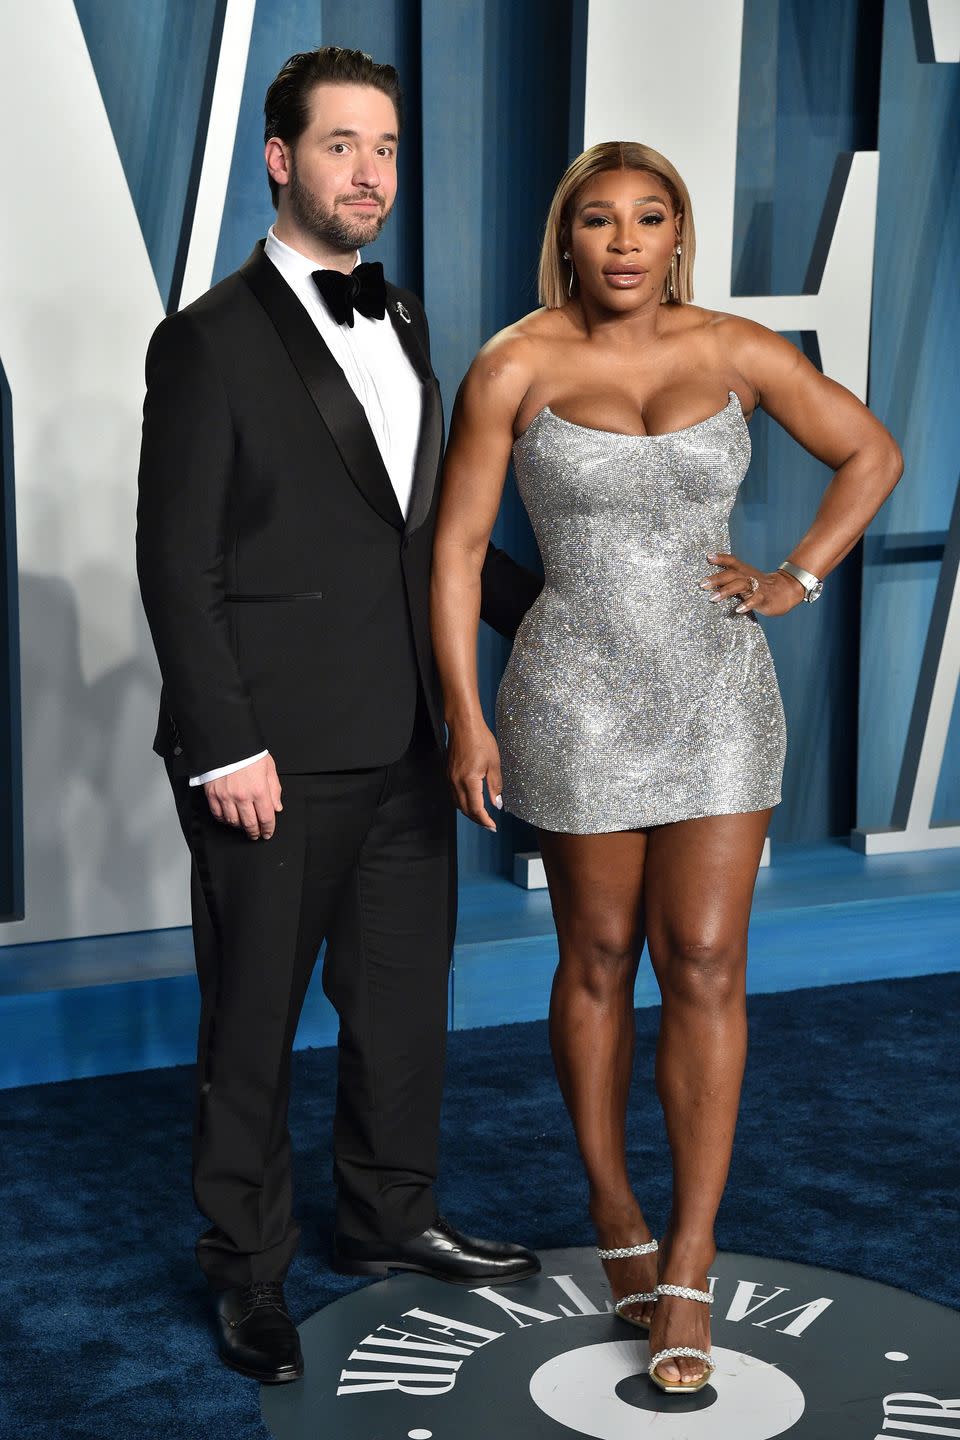 4) Alexis Ohanian and Serena Williams